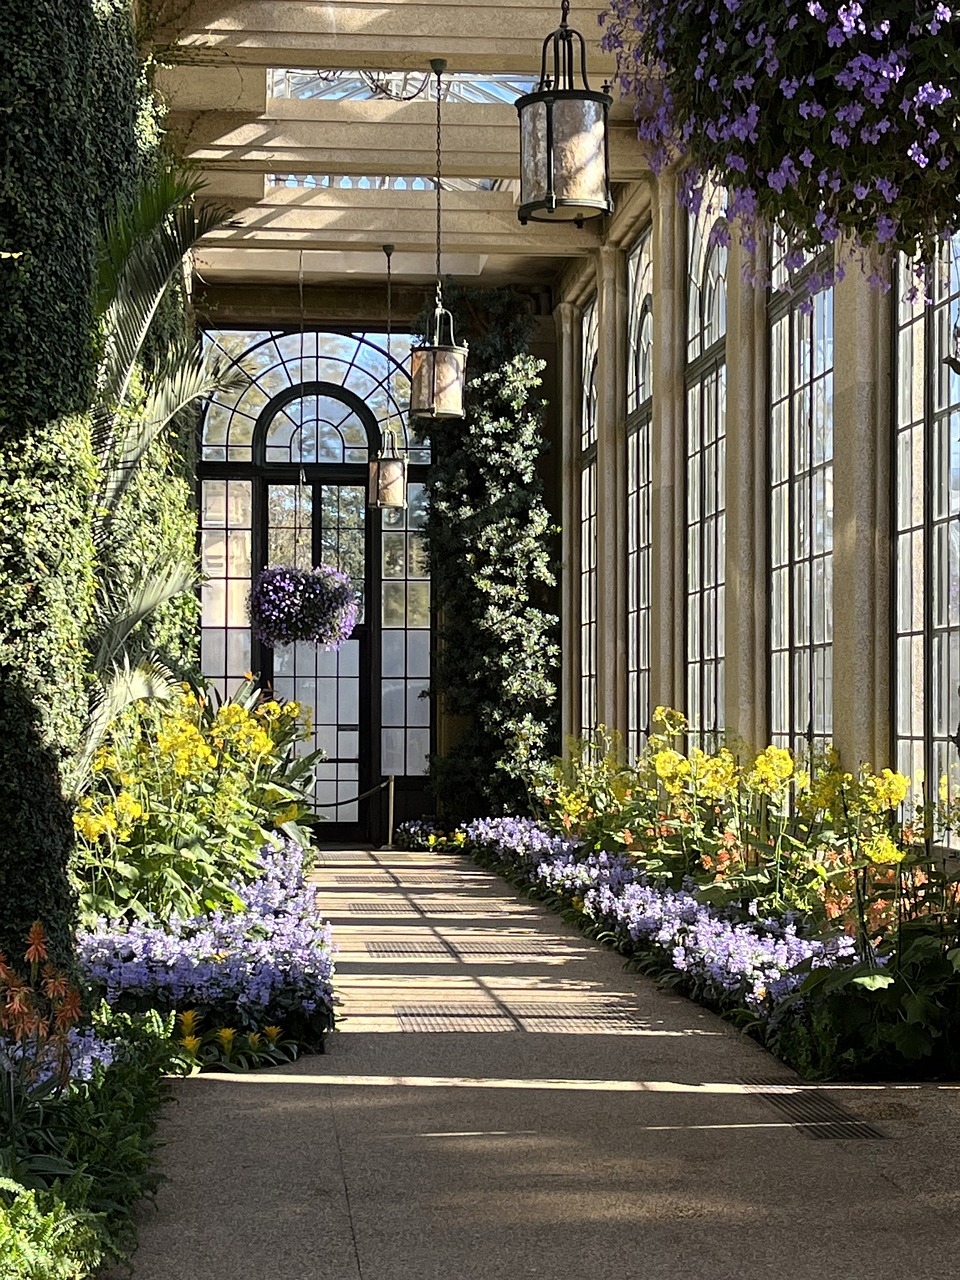 You may not have the luxury of a beautiful conservatory like this, but you can find indoor spaces with light and warmth for your indoor plants this winter. Photo: Rick Cross winter months